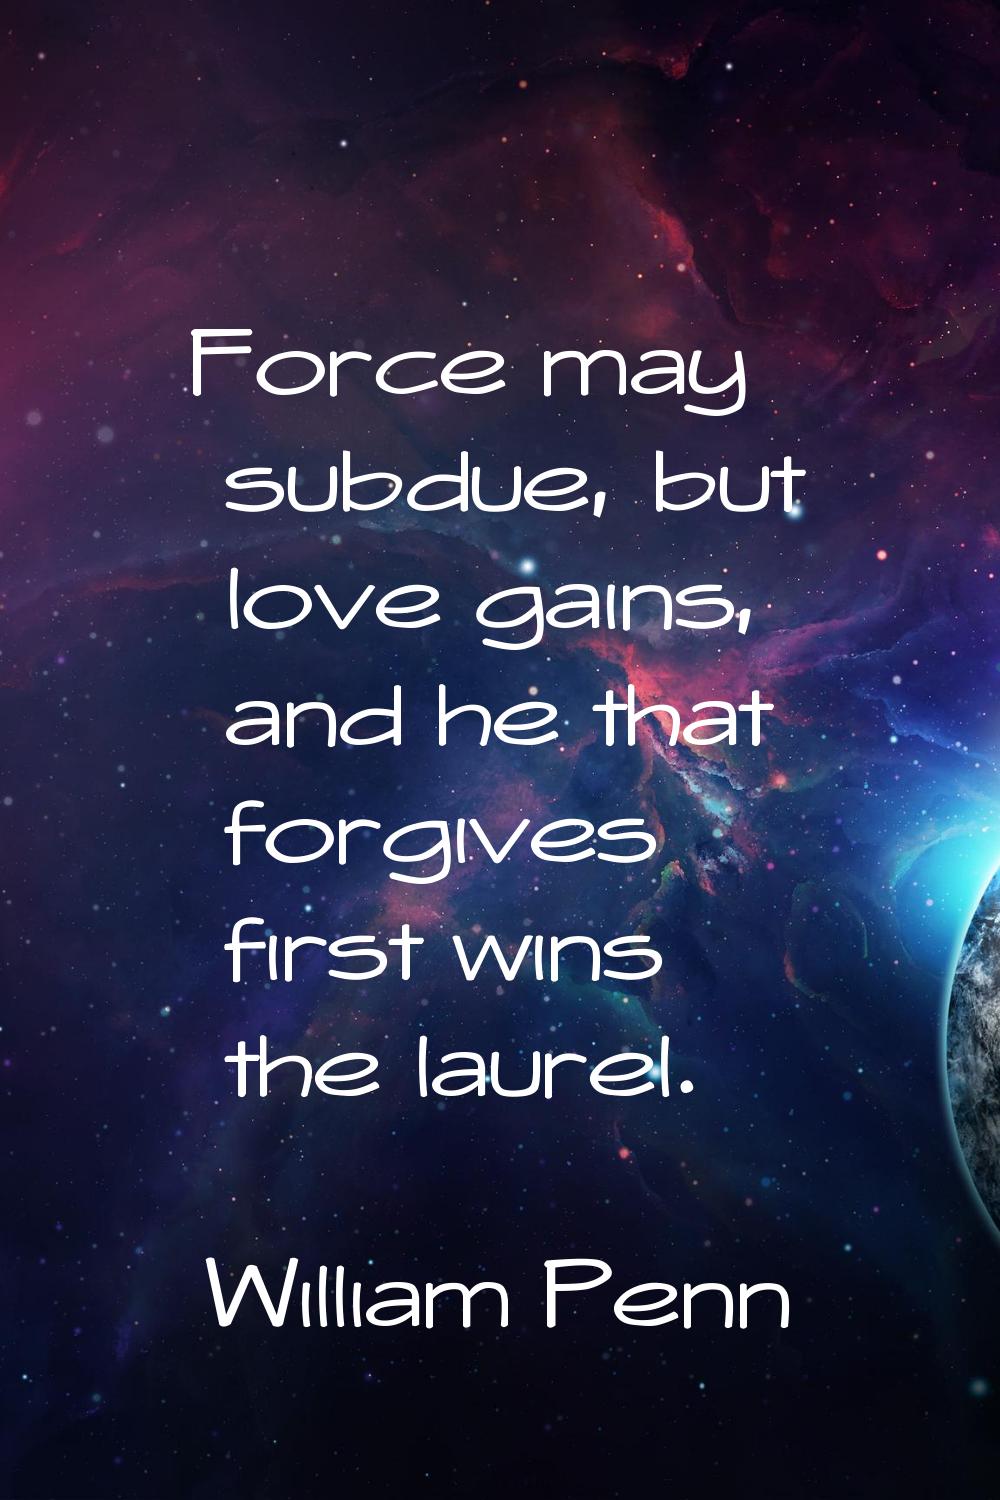 Force may subdue, but love gains, and he that forgives first wins the laurel.